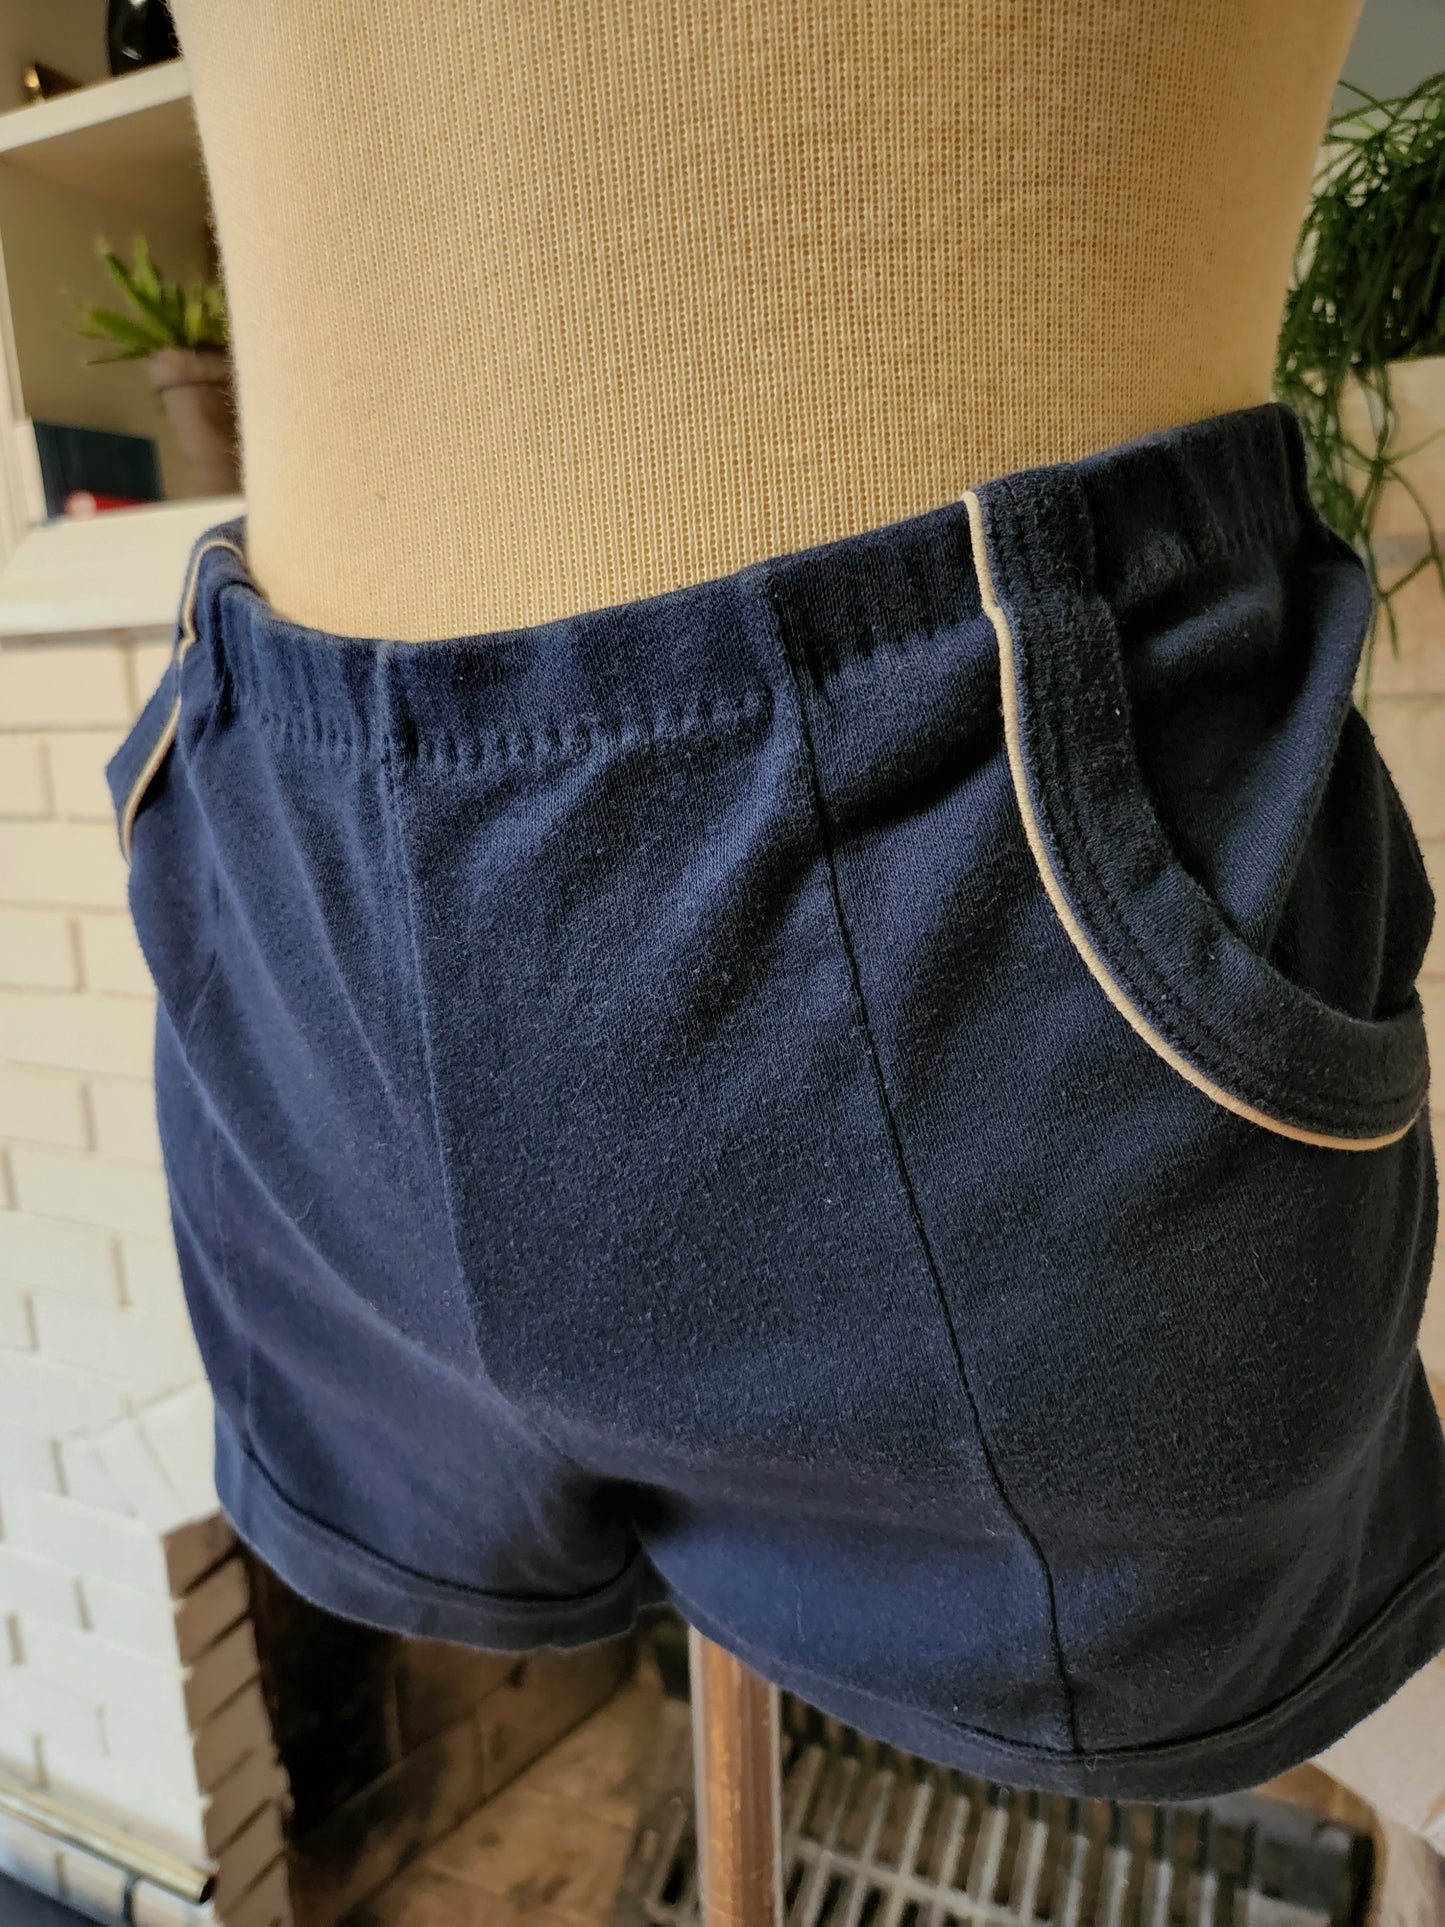 Vintage Blue Shorts by Dogonits